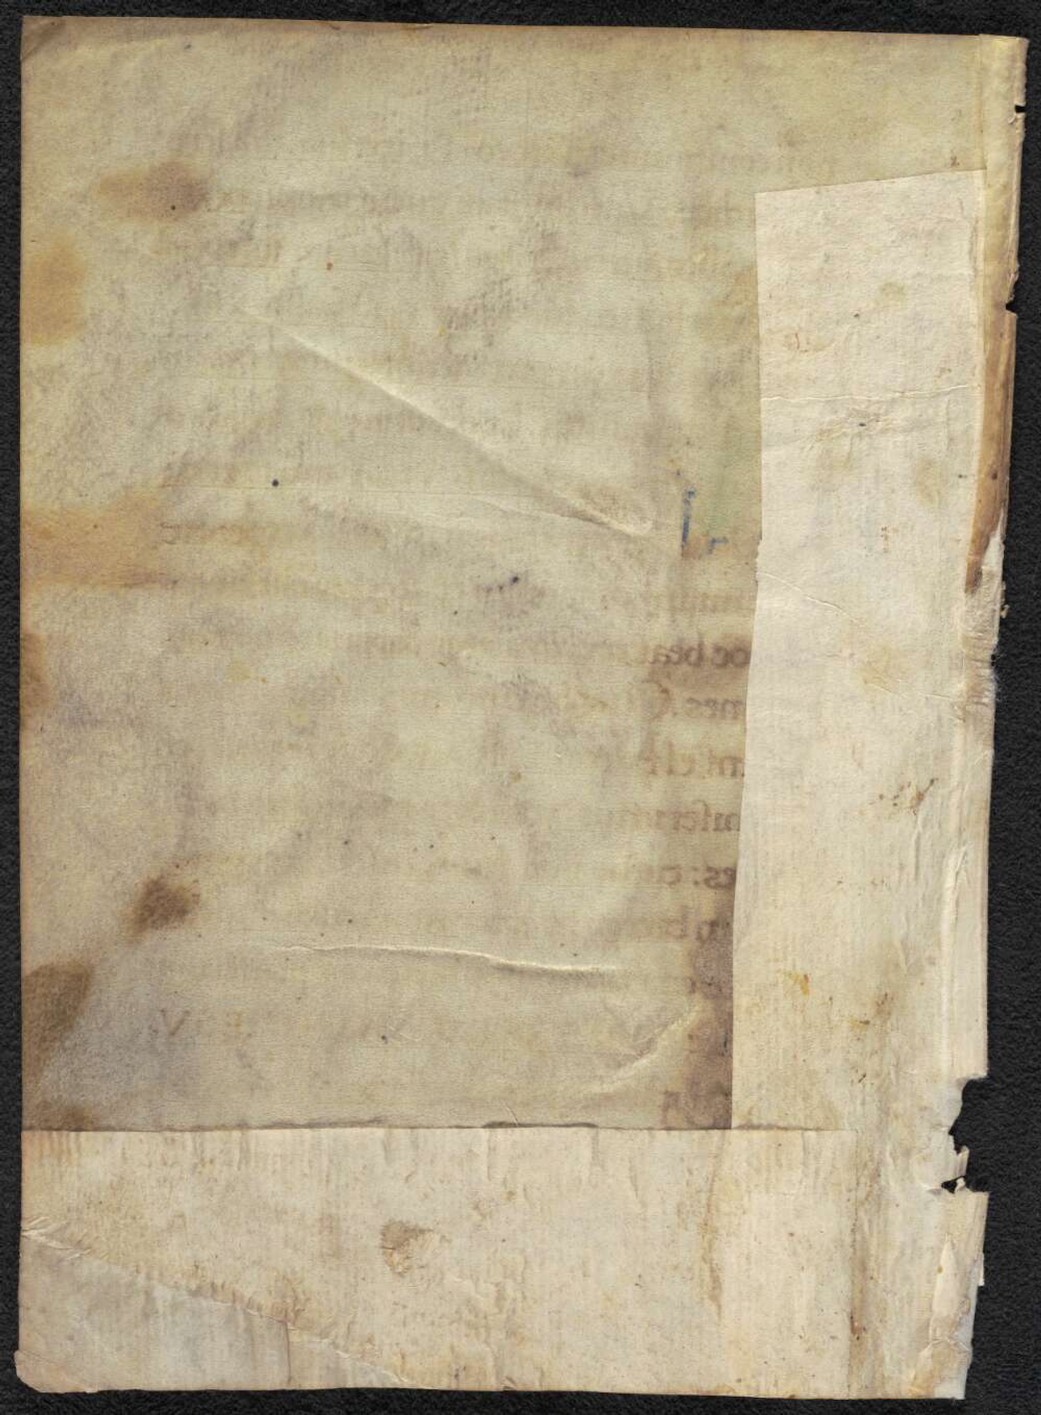 verso - National Library of Australia MS 4052/3/107